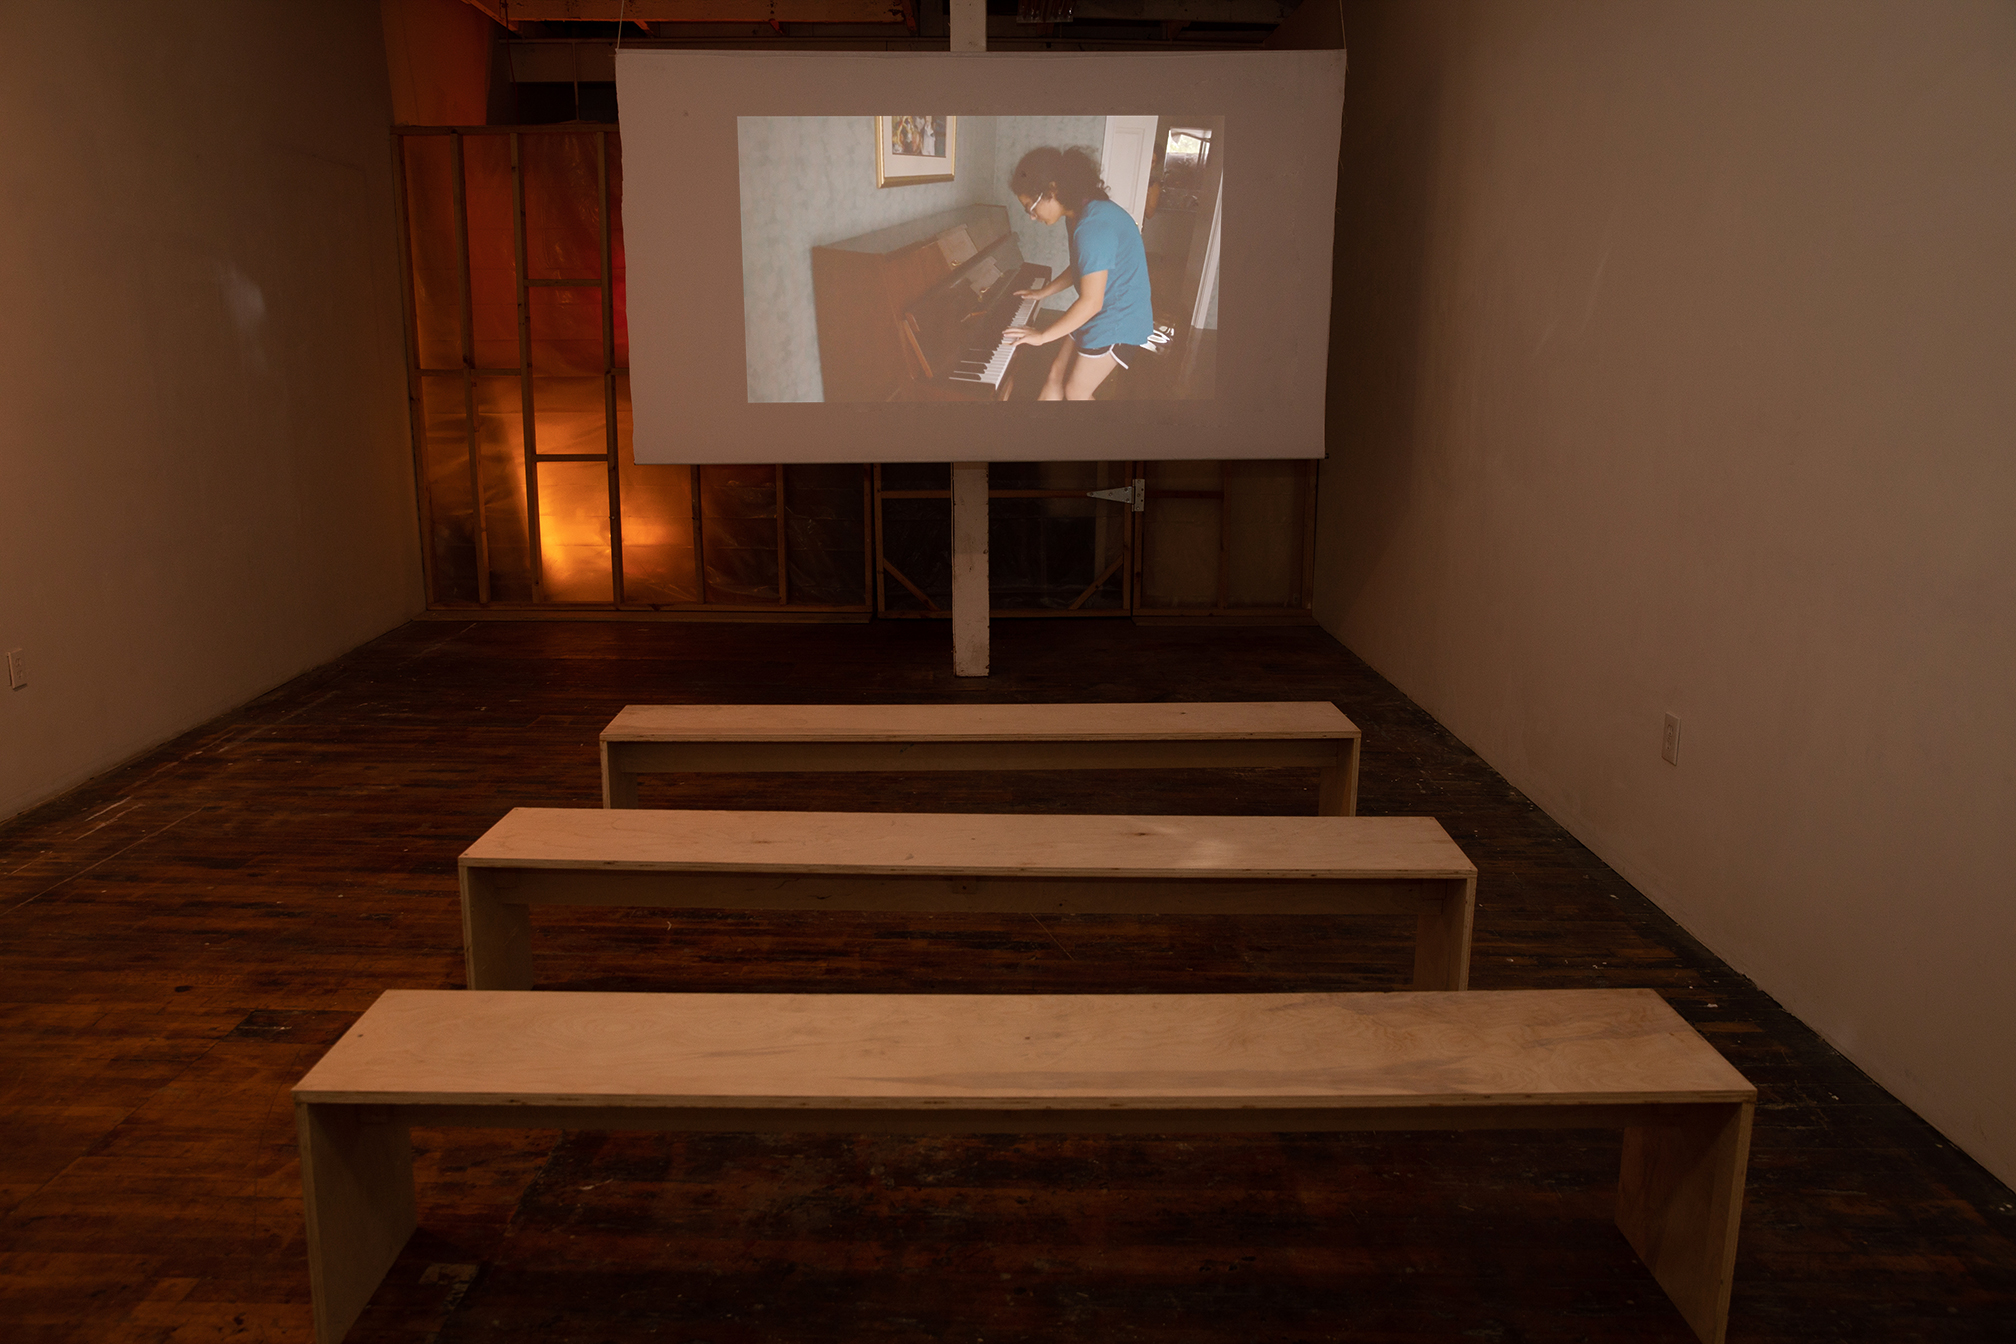 A projection screen with three wooden benches for seating in front in a room with warm lighting